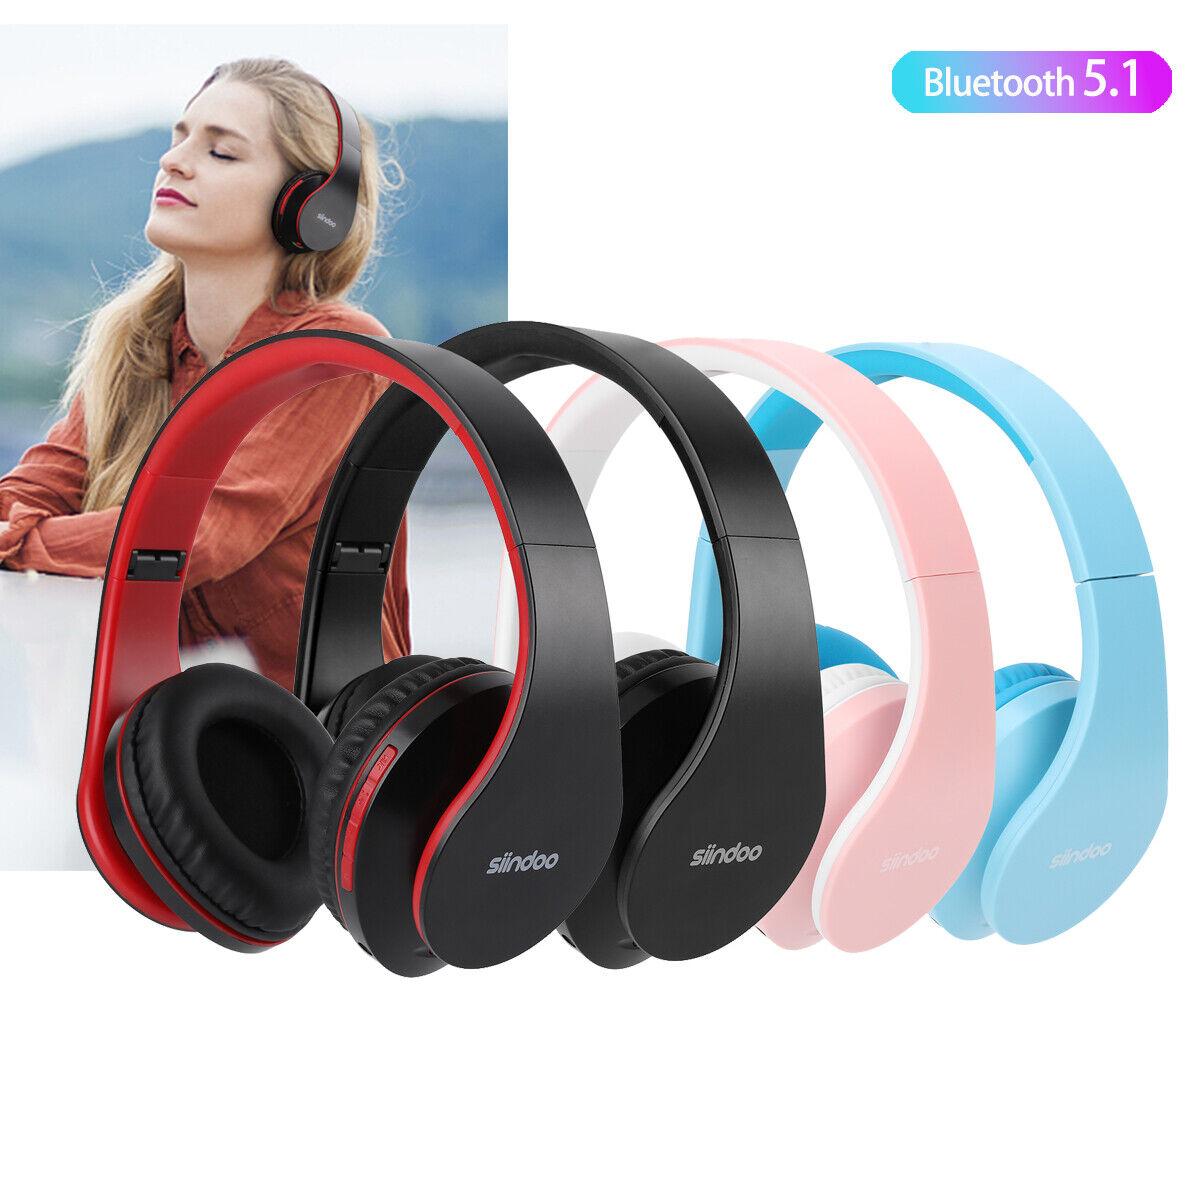 siindoo Bluetooth Headphones Over-Ear, Foldable Wireless and Wired Stereo Headset Micro SD/TF, FM for Cell Phone,PC,Soft Earmuffs